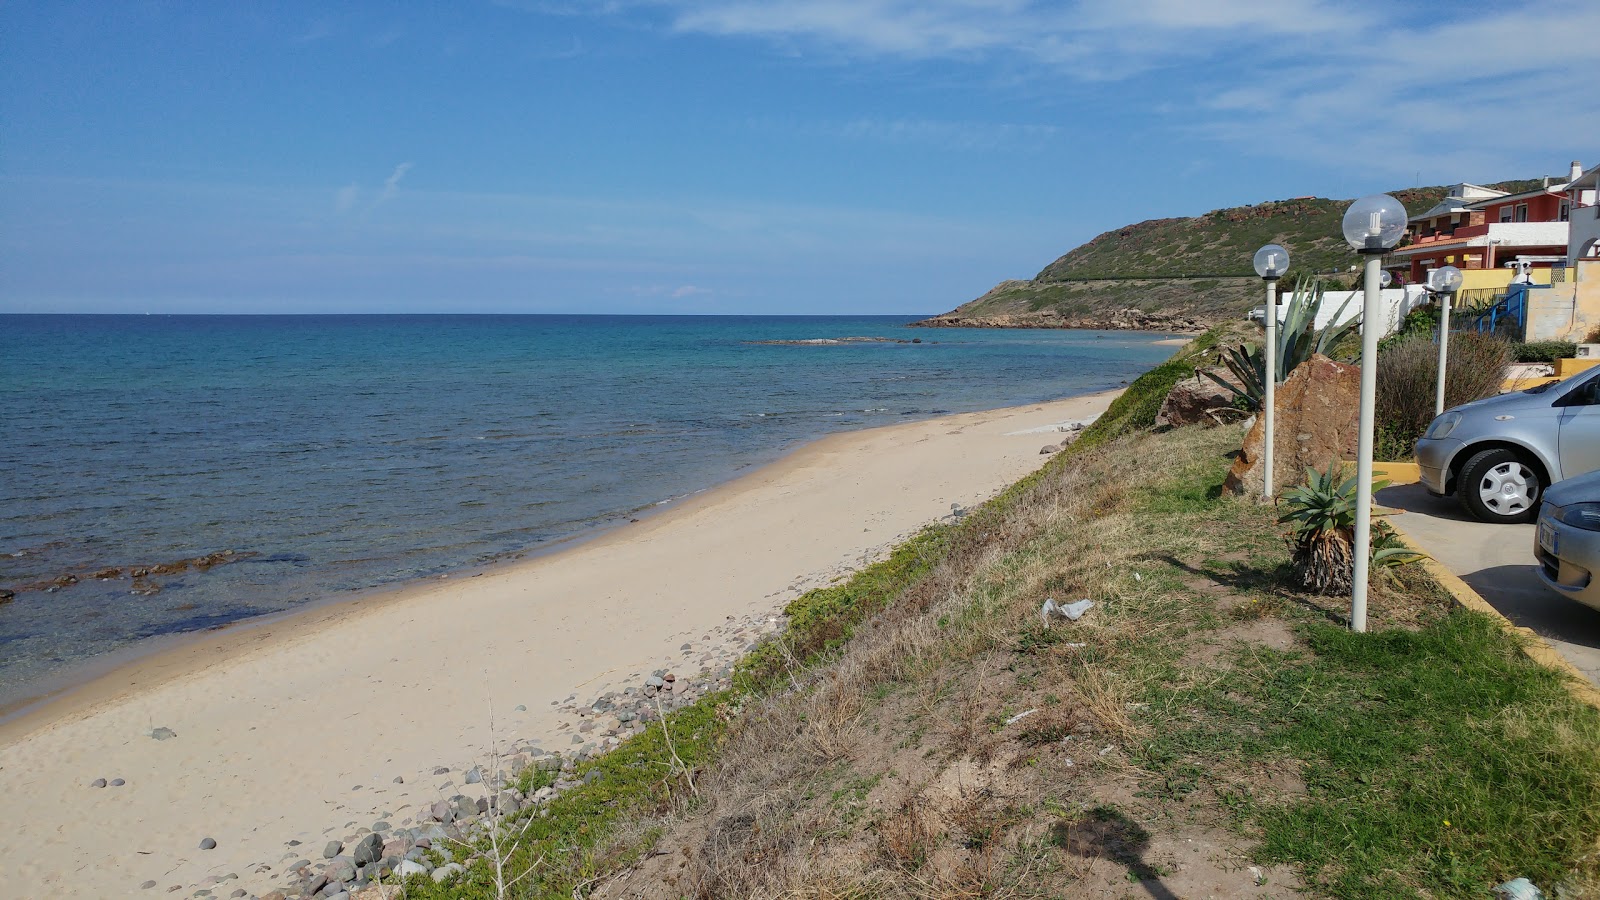 Photo of Spiaggia lu Bagnu and the settlement